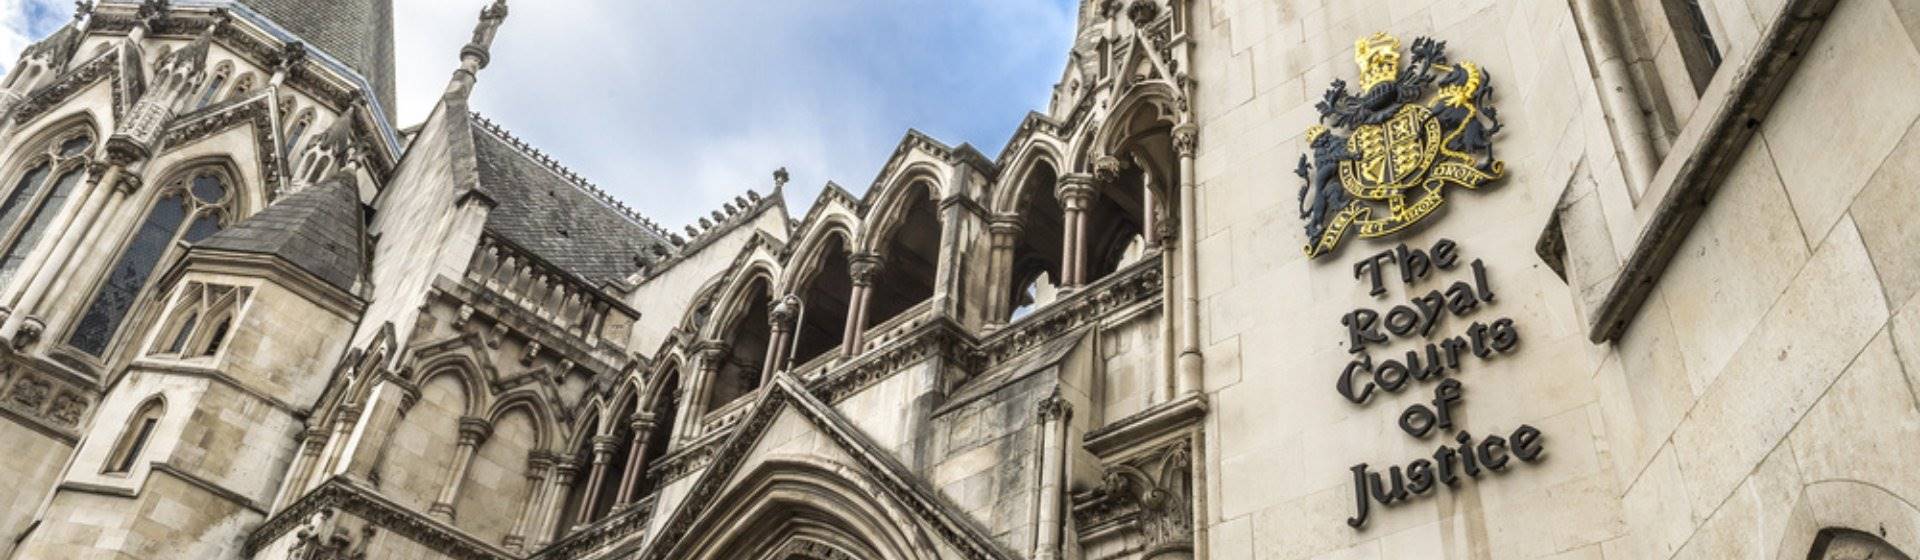 The Victorian Gothic style main entrance to the The Royal Courts of Justice